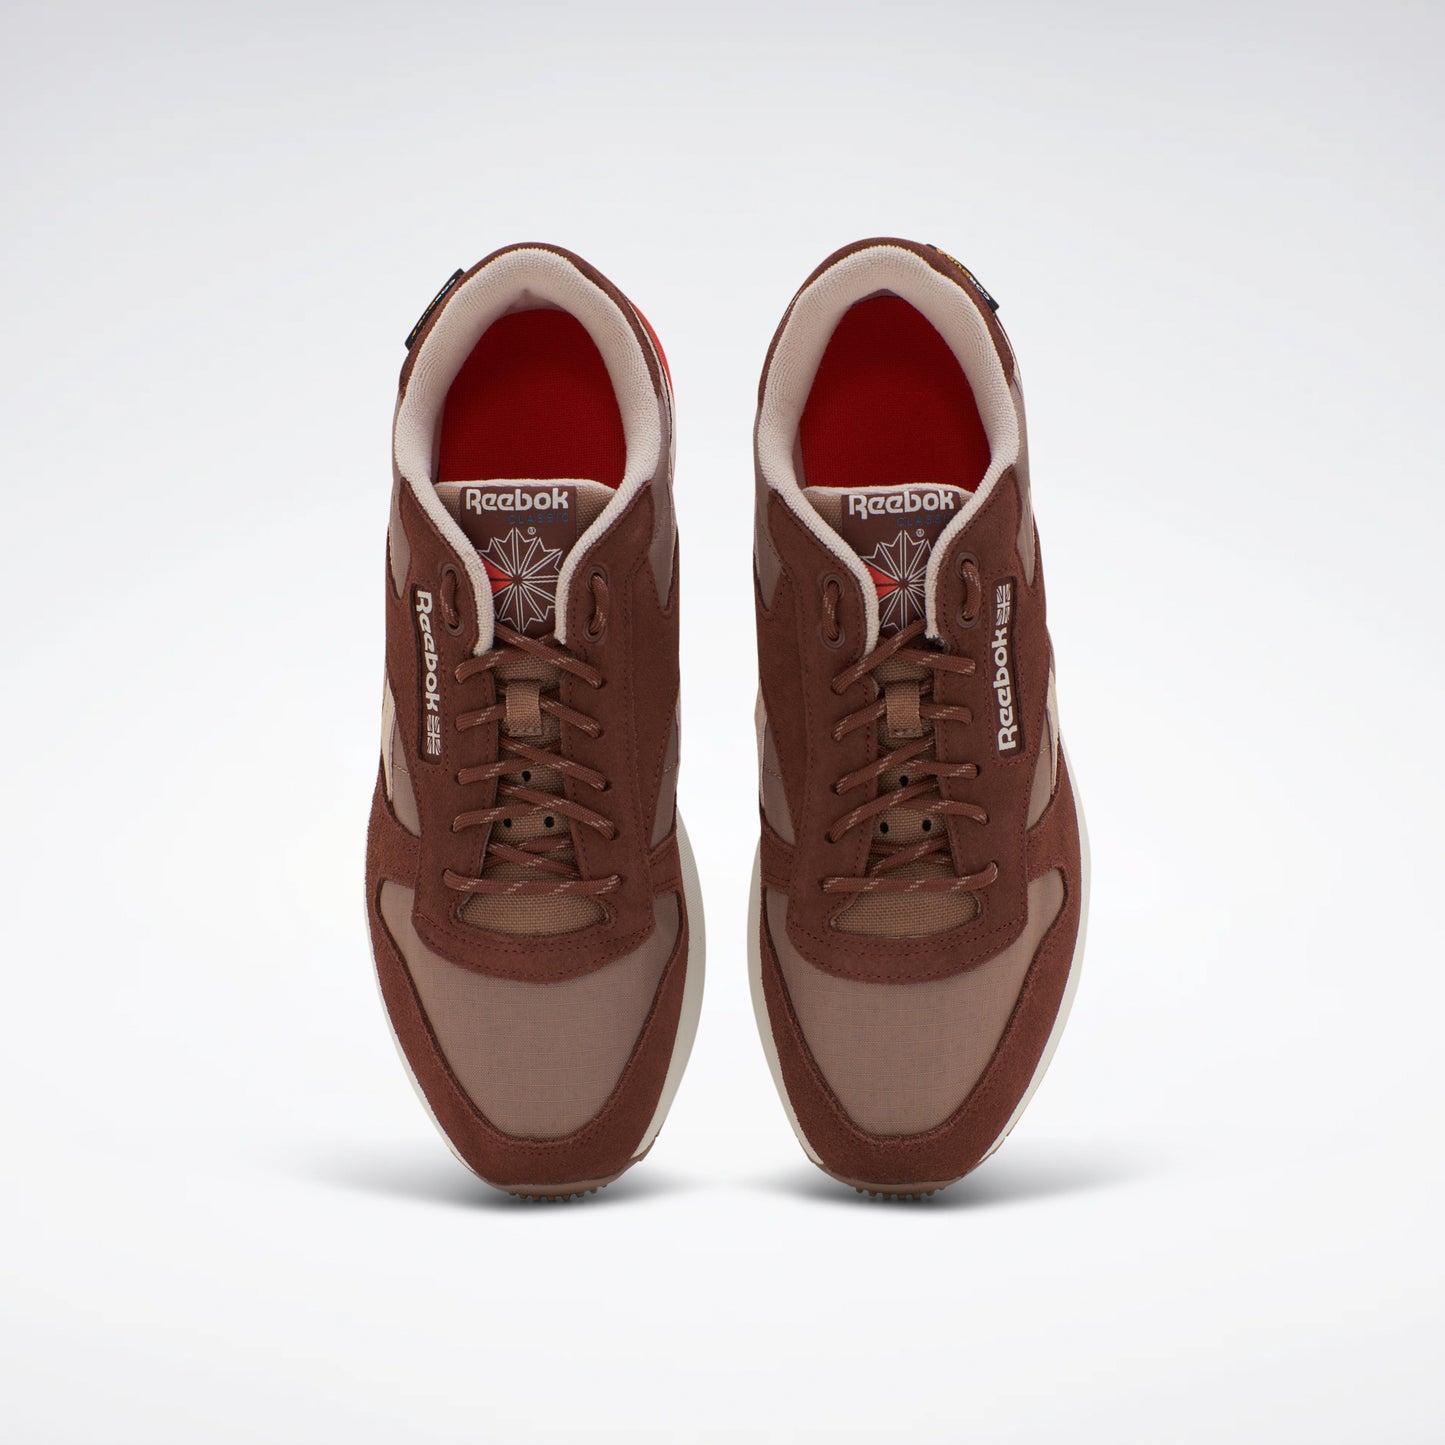 Classic Leather Shoes Trail Brown/Taupe/Soft Ecru